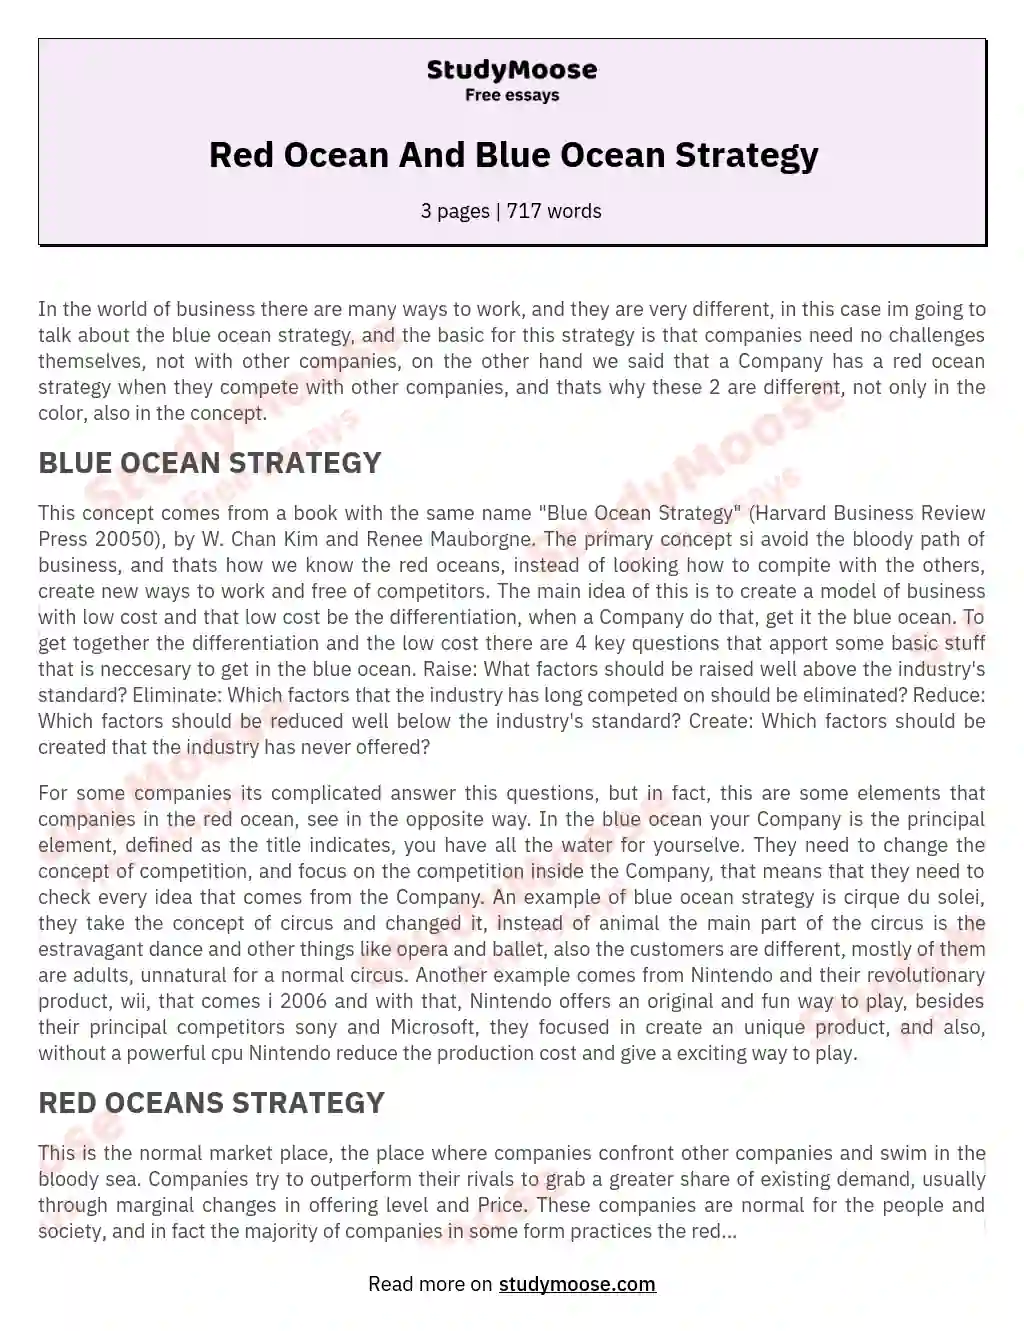 Red Ocean And Blue Ocean Strategy essay